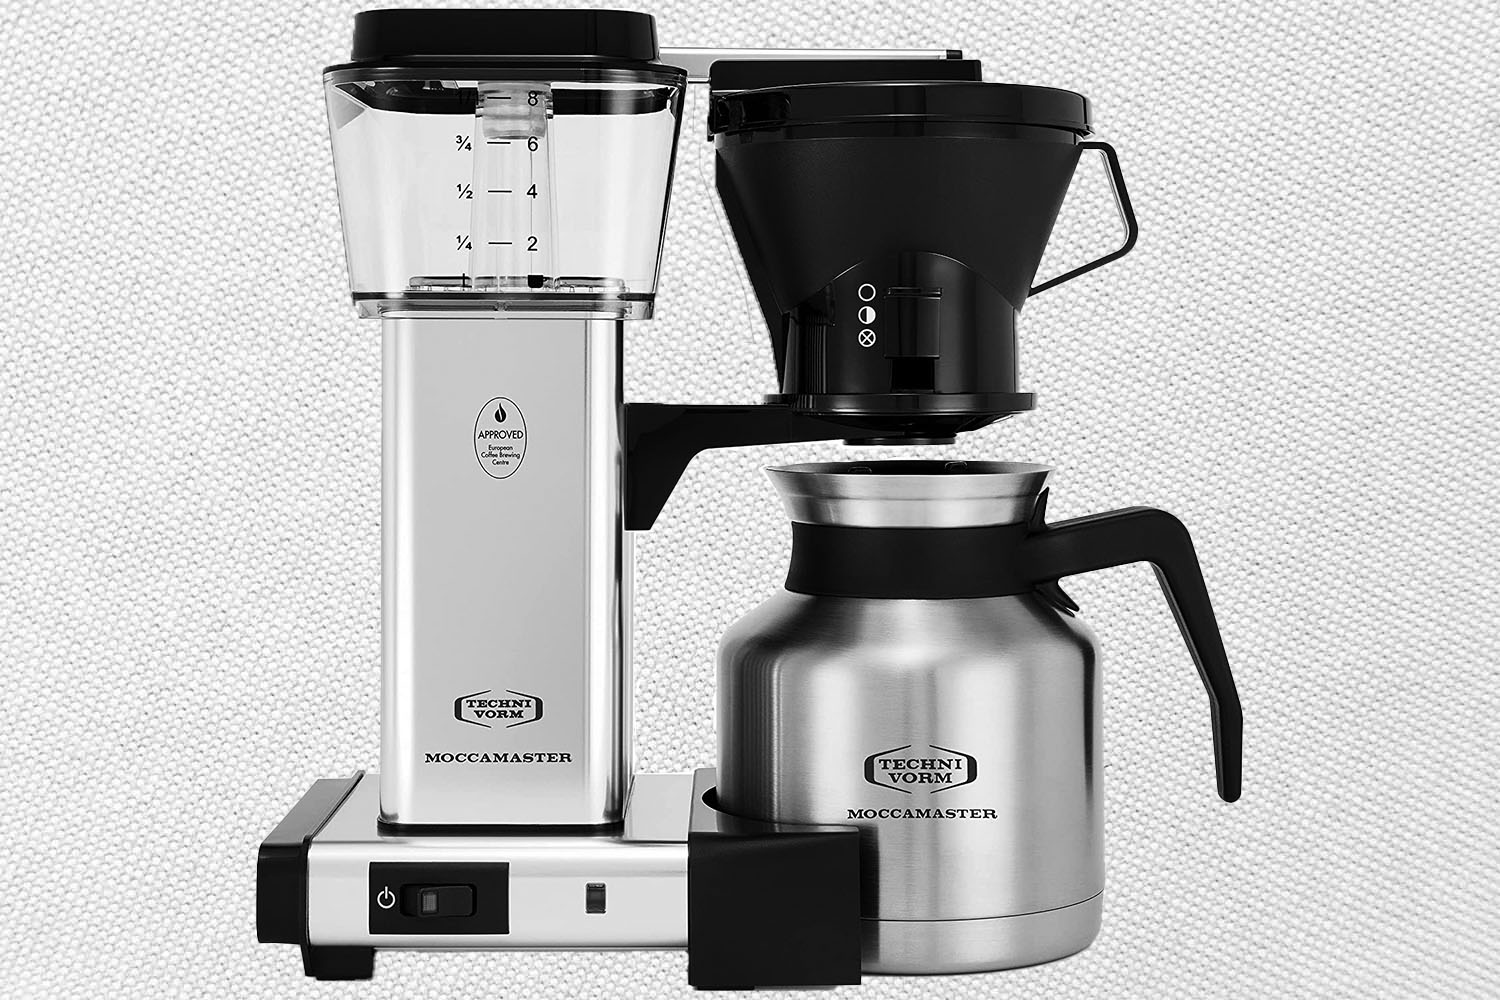 A Technivorn Moccamaster Coffee Brewer on a gray and white background